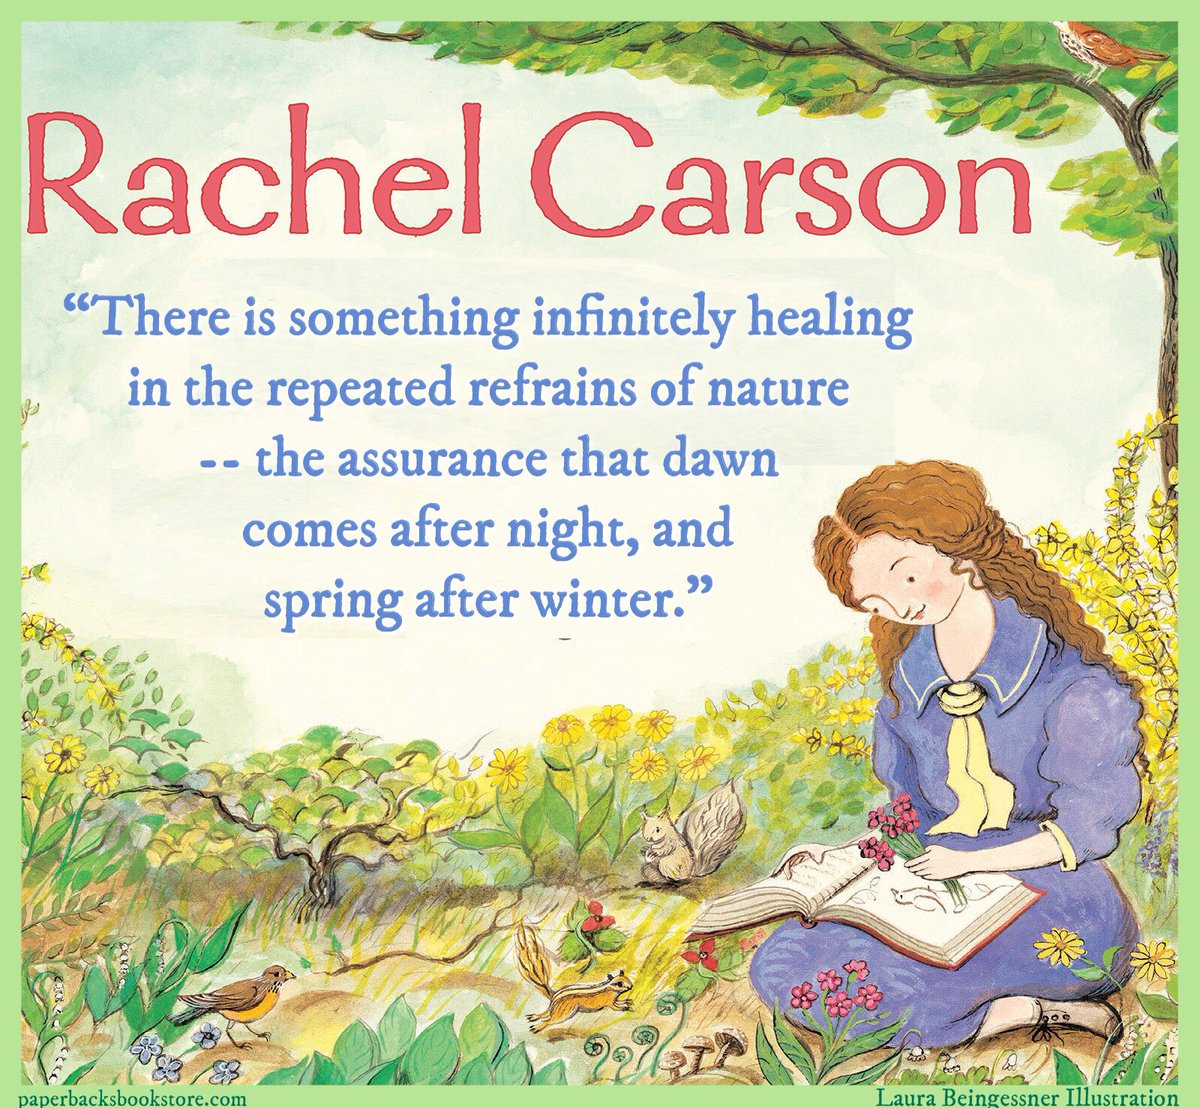 “Those who contemplate the beauty of the earth find reserves of strength that will endure as long as life lasts.”  ~Rachel Carson (1907–1964)

#RachelCarson #SilentSpring #contemplatebeauty #beauty #beautyoftheearth #reservesofstrength #strength #enduringstrength #lifelong #books